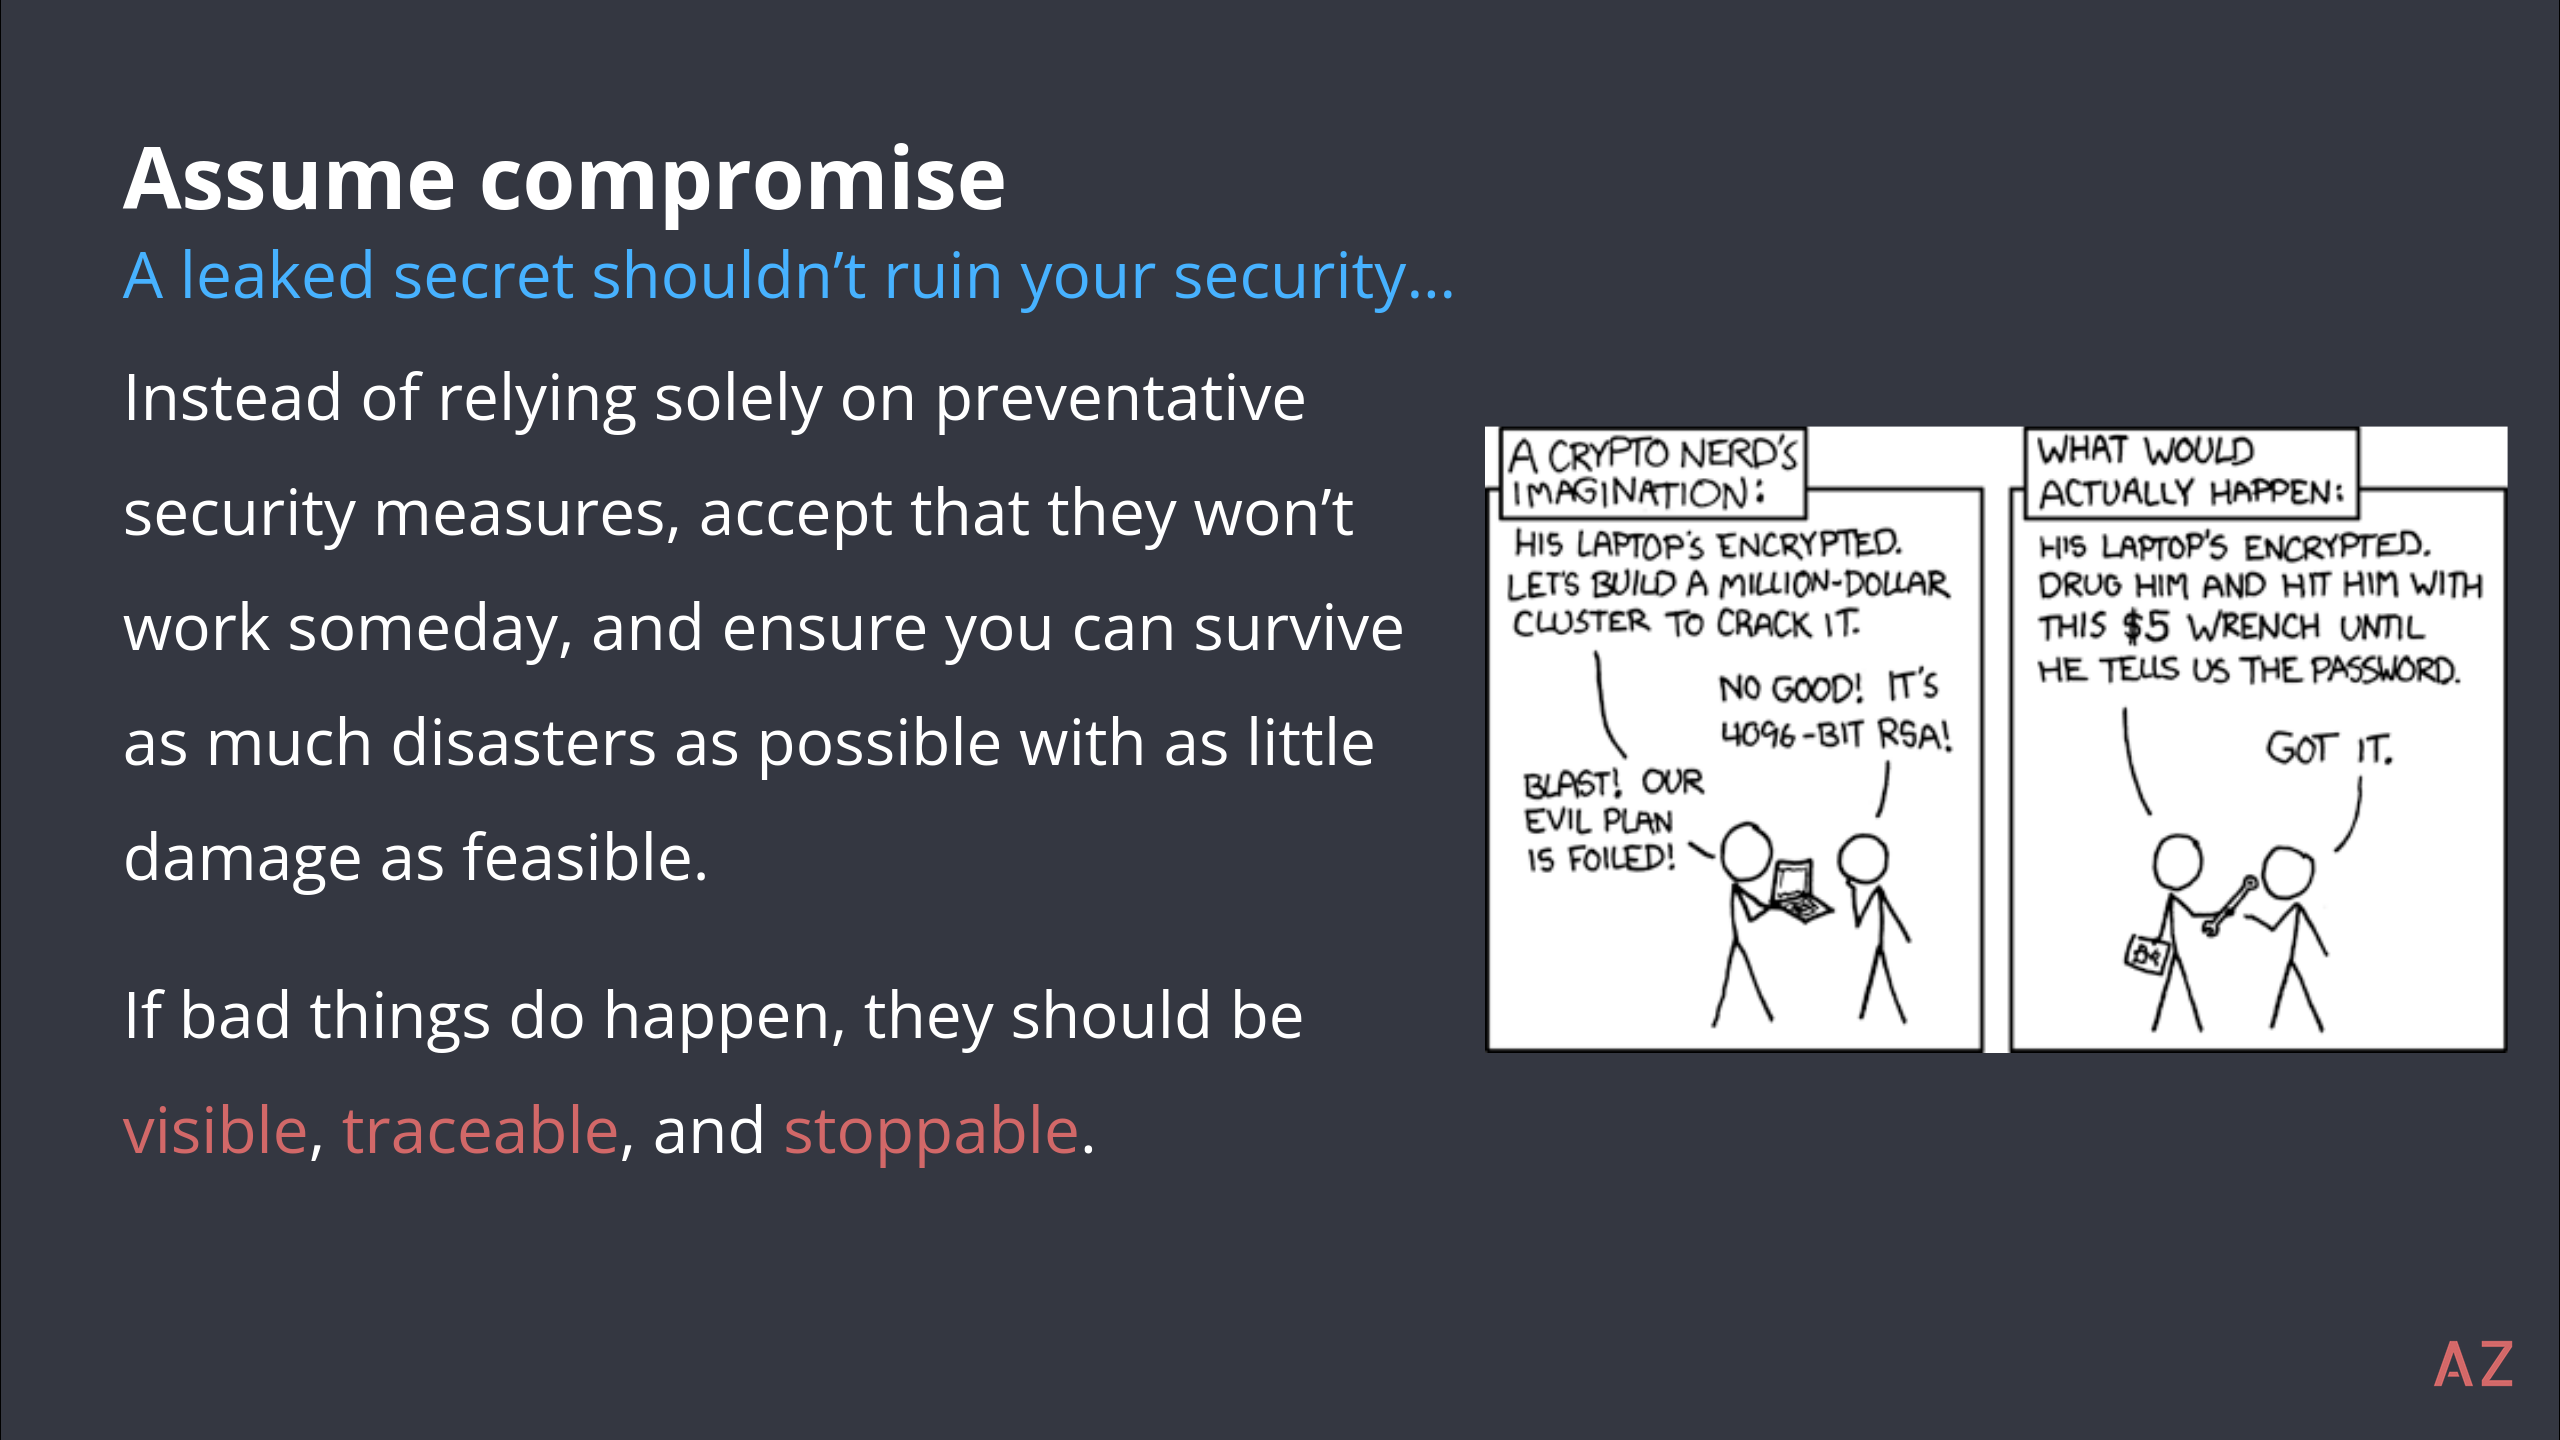 Assume compromise